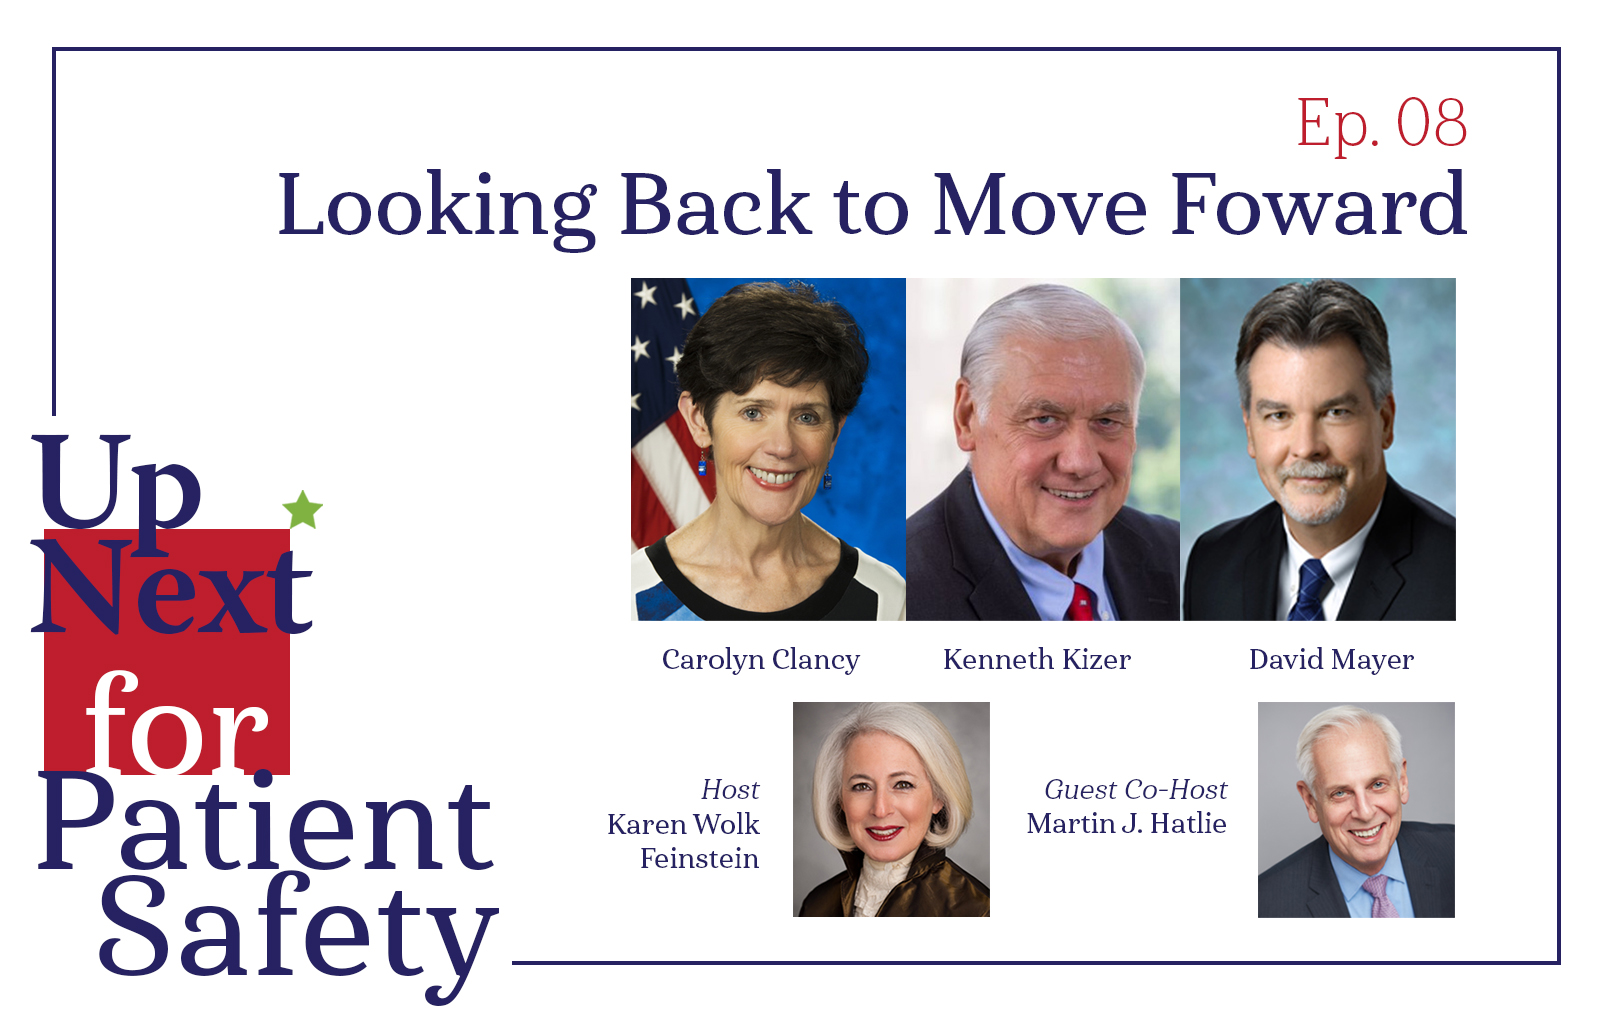 Up Next for Patient Safety Episode 8: Looking Back to Move Forward